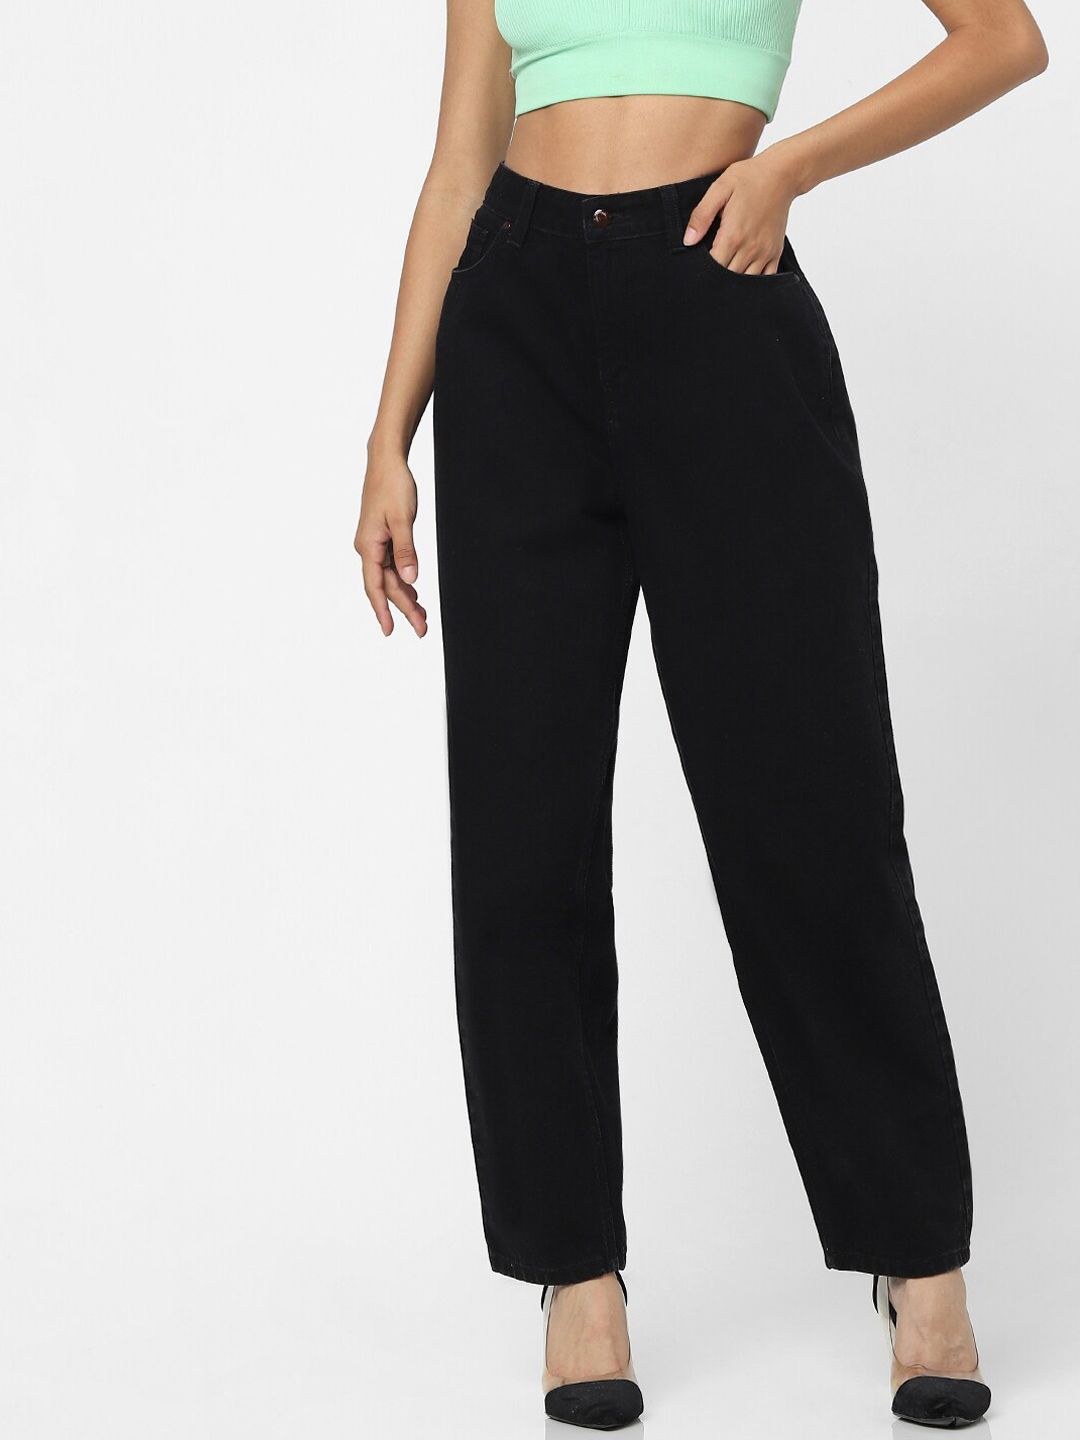 ONLY Women Black Straight Fit High-Rise Jeans Price in India